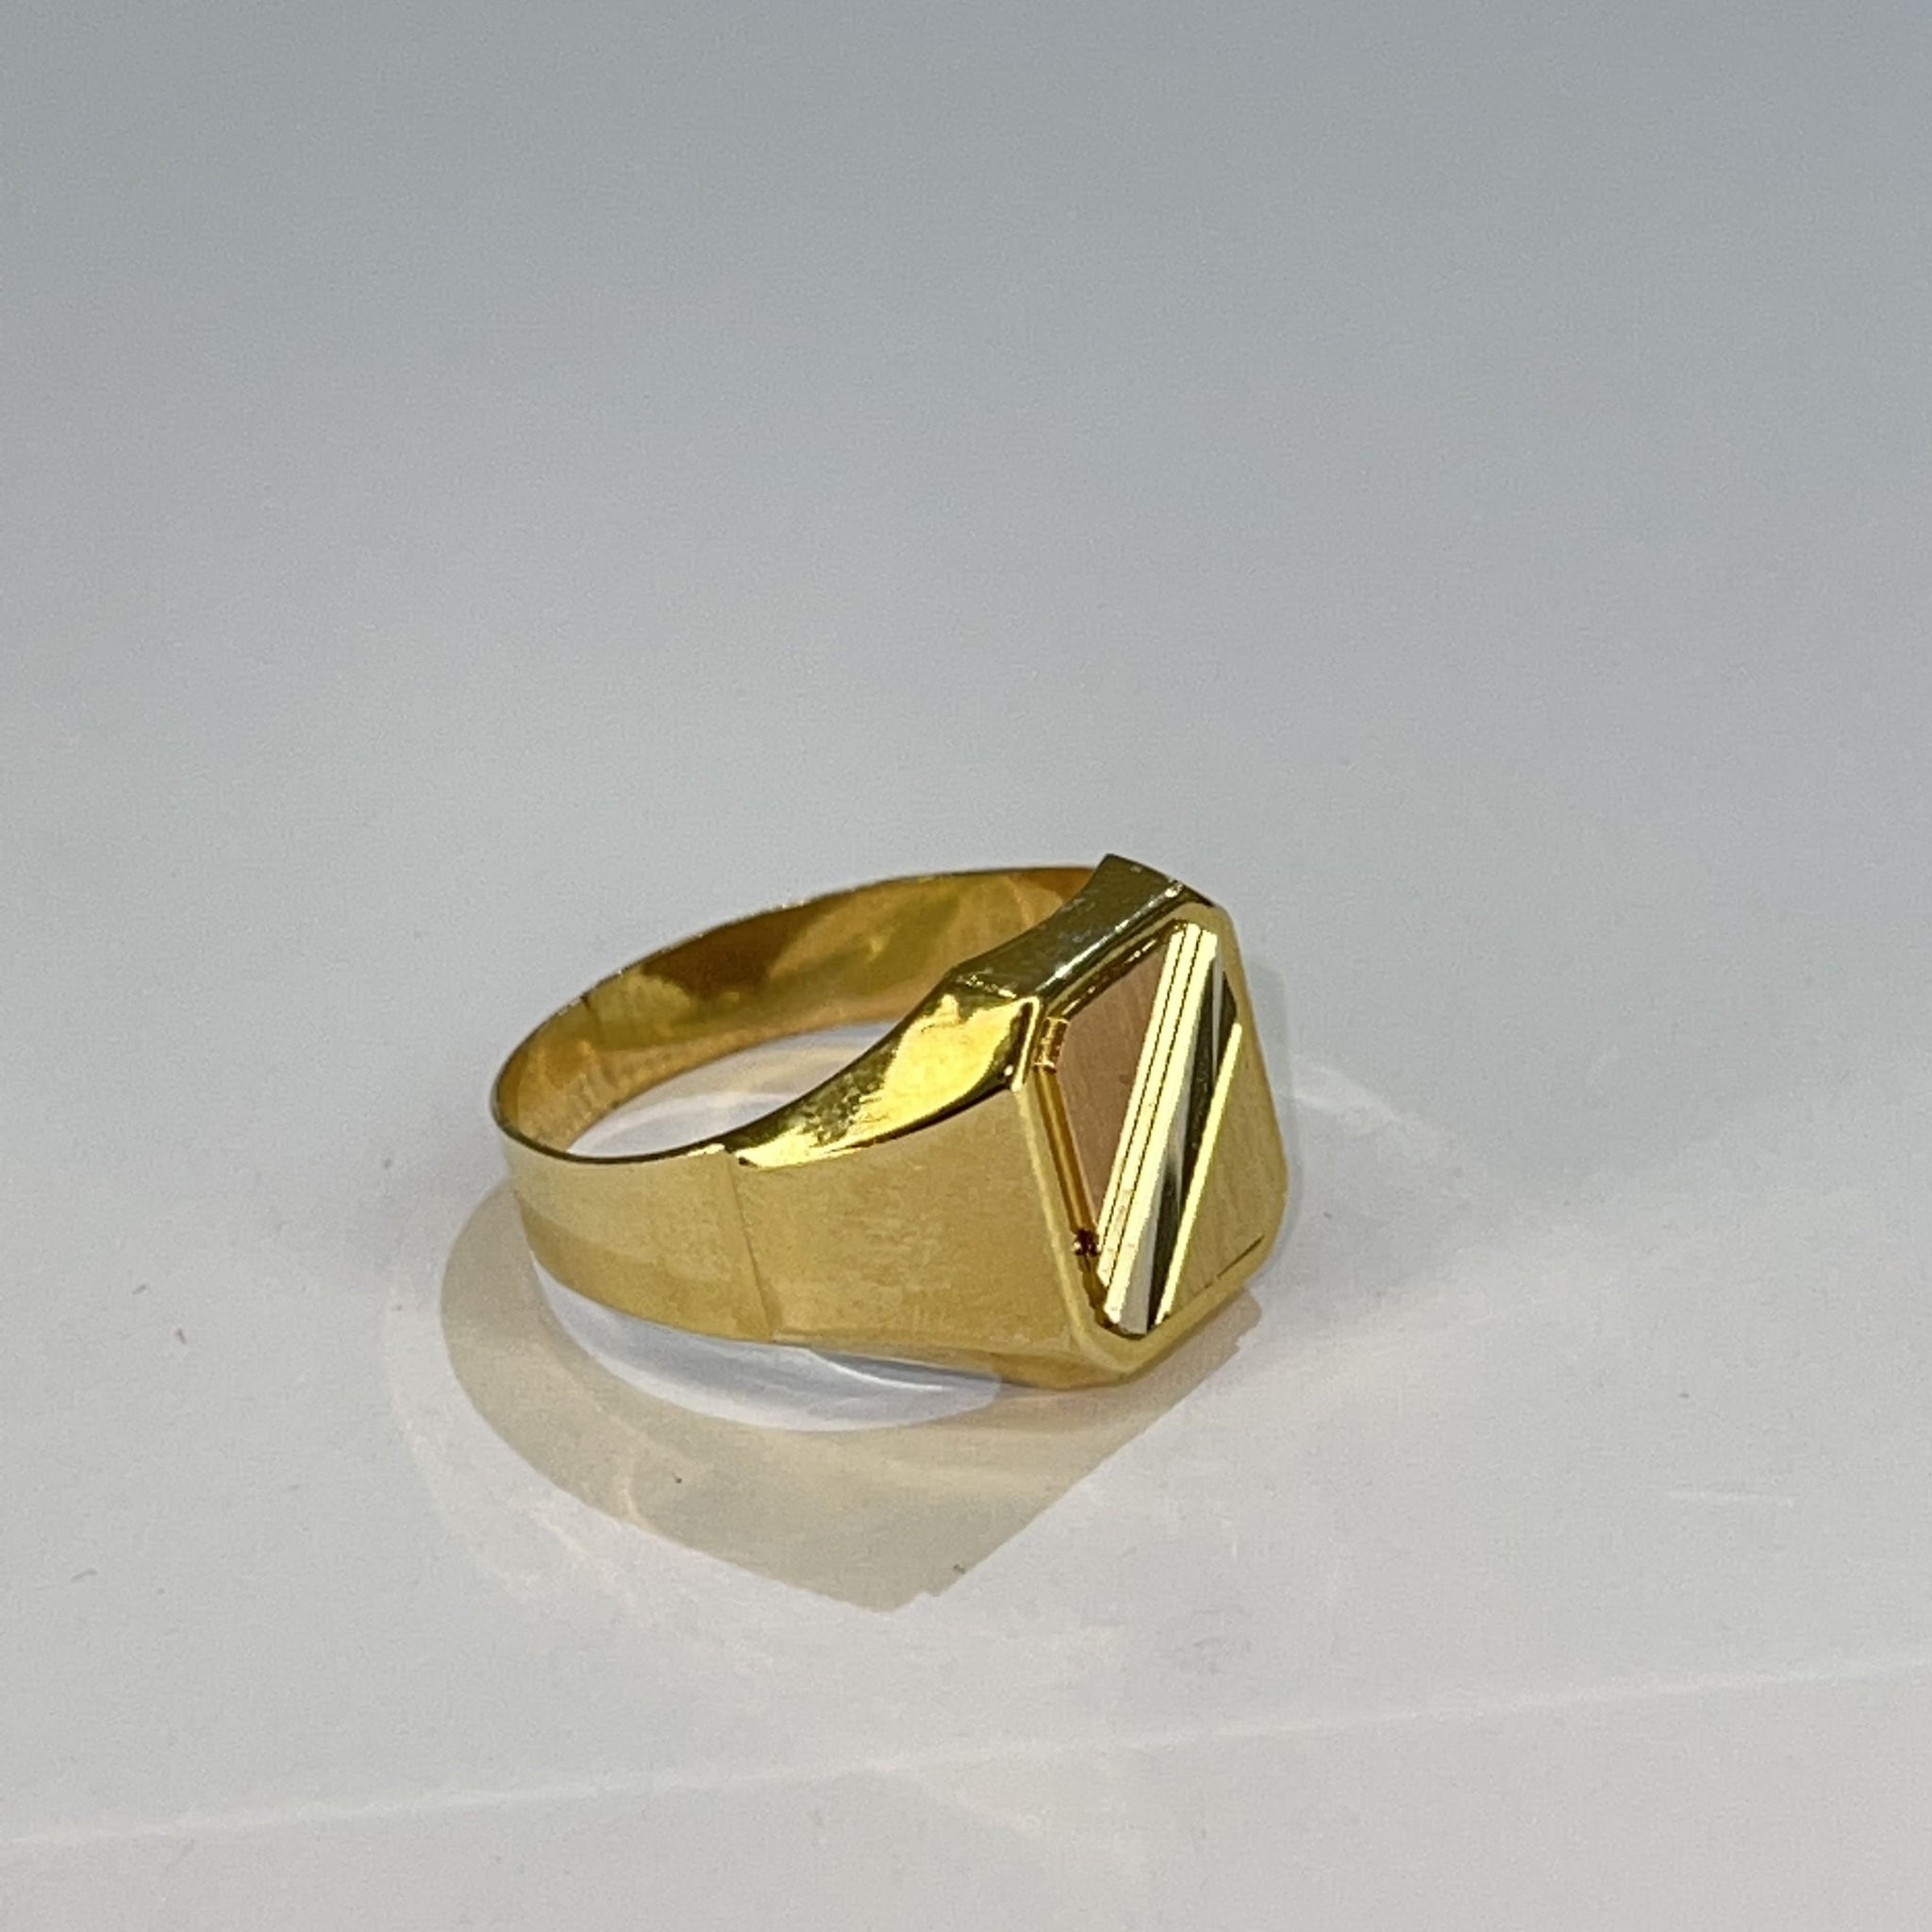 Bicolor Signet Ring - 18 carat gold with Diamond Cuts